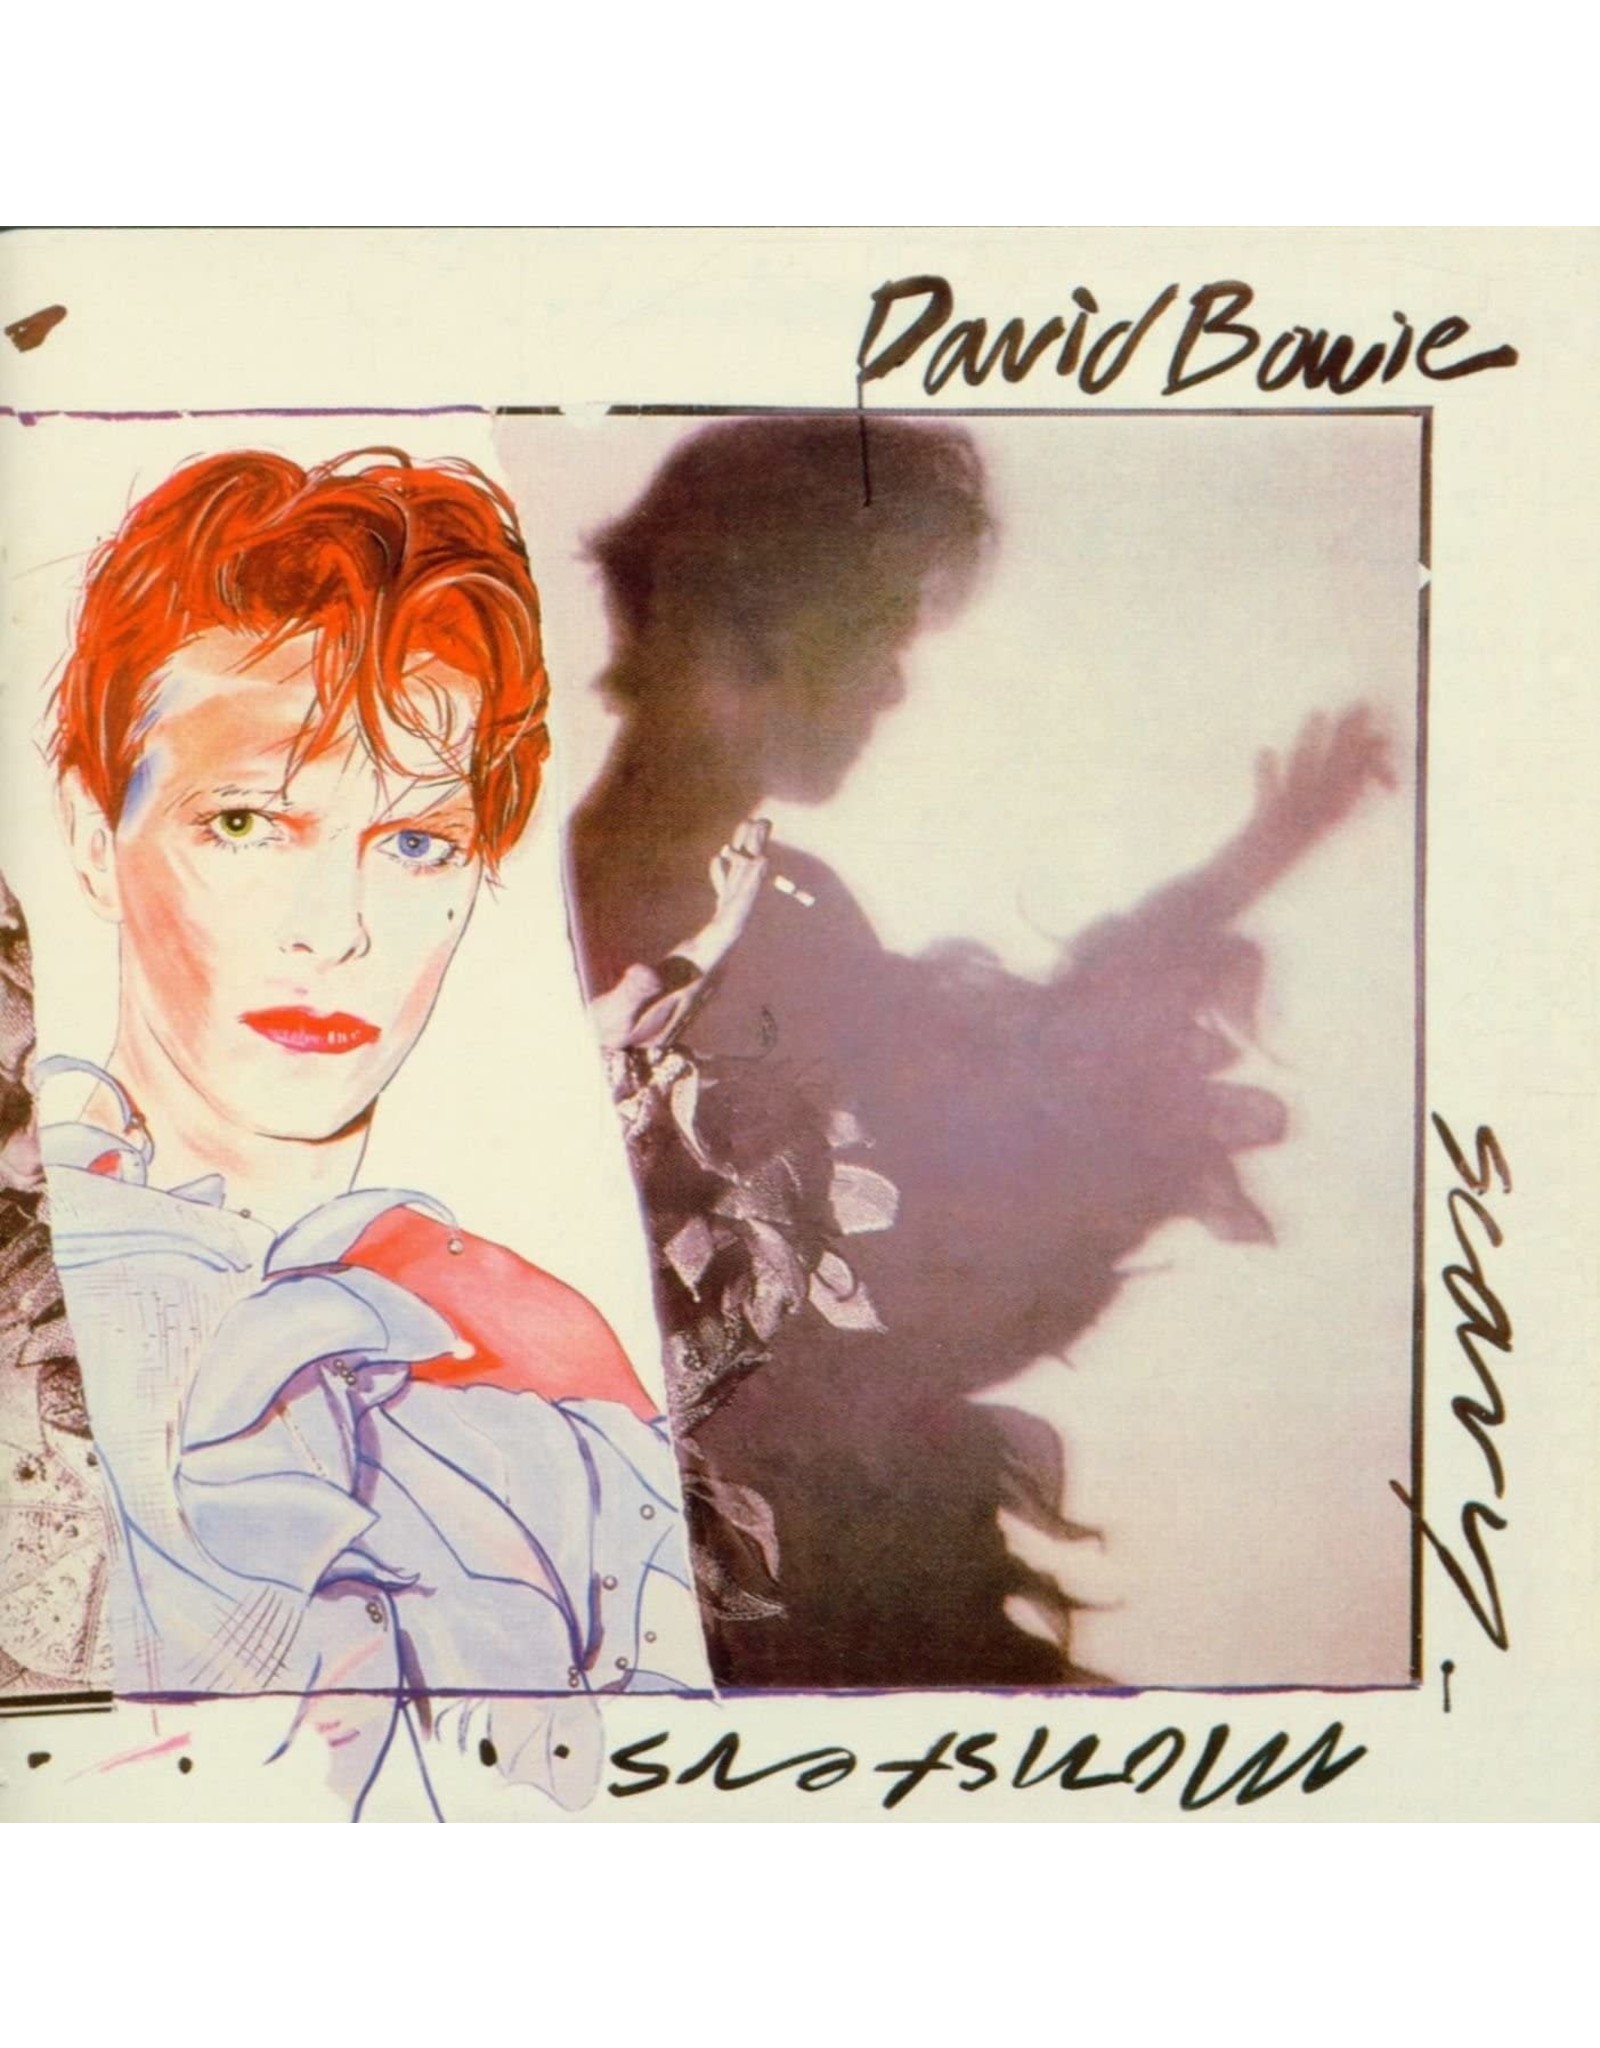 Bowie, David - Scary Monsters LP